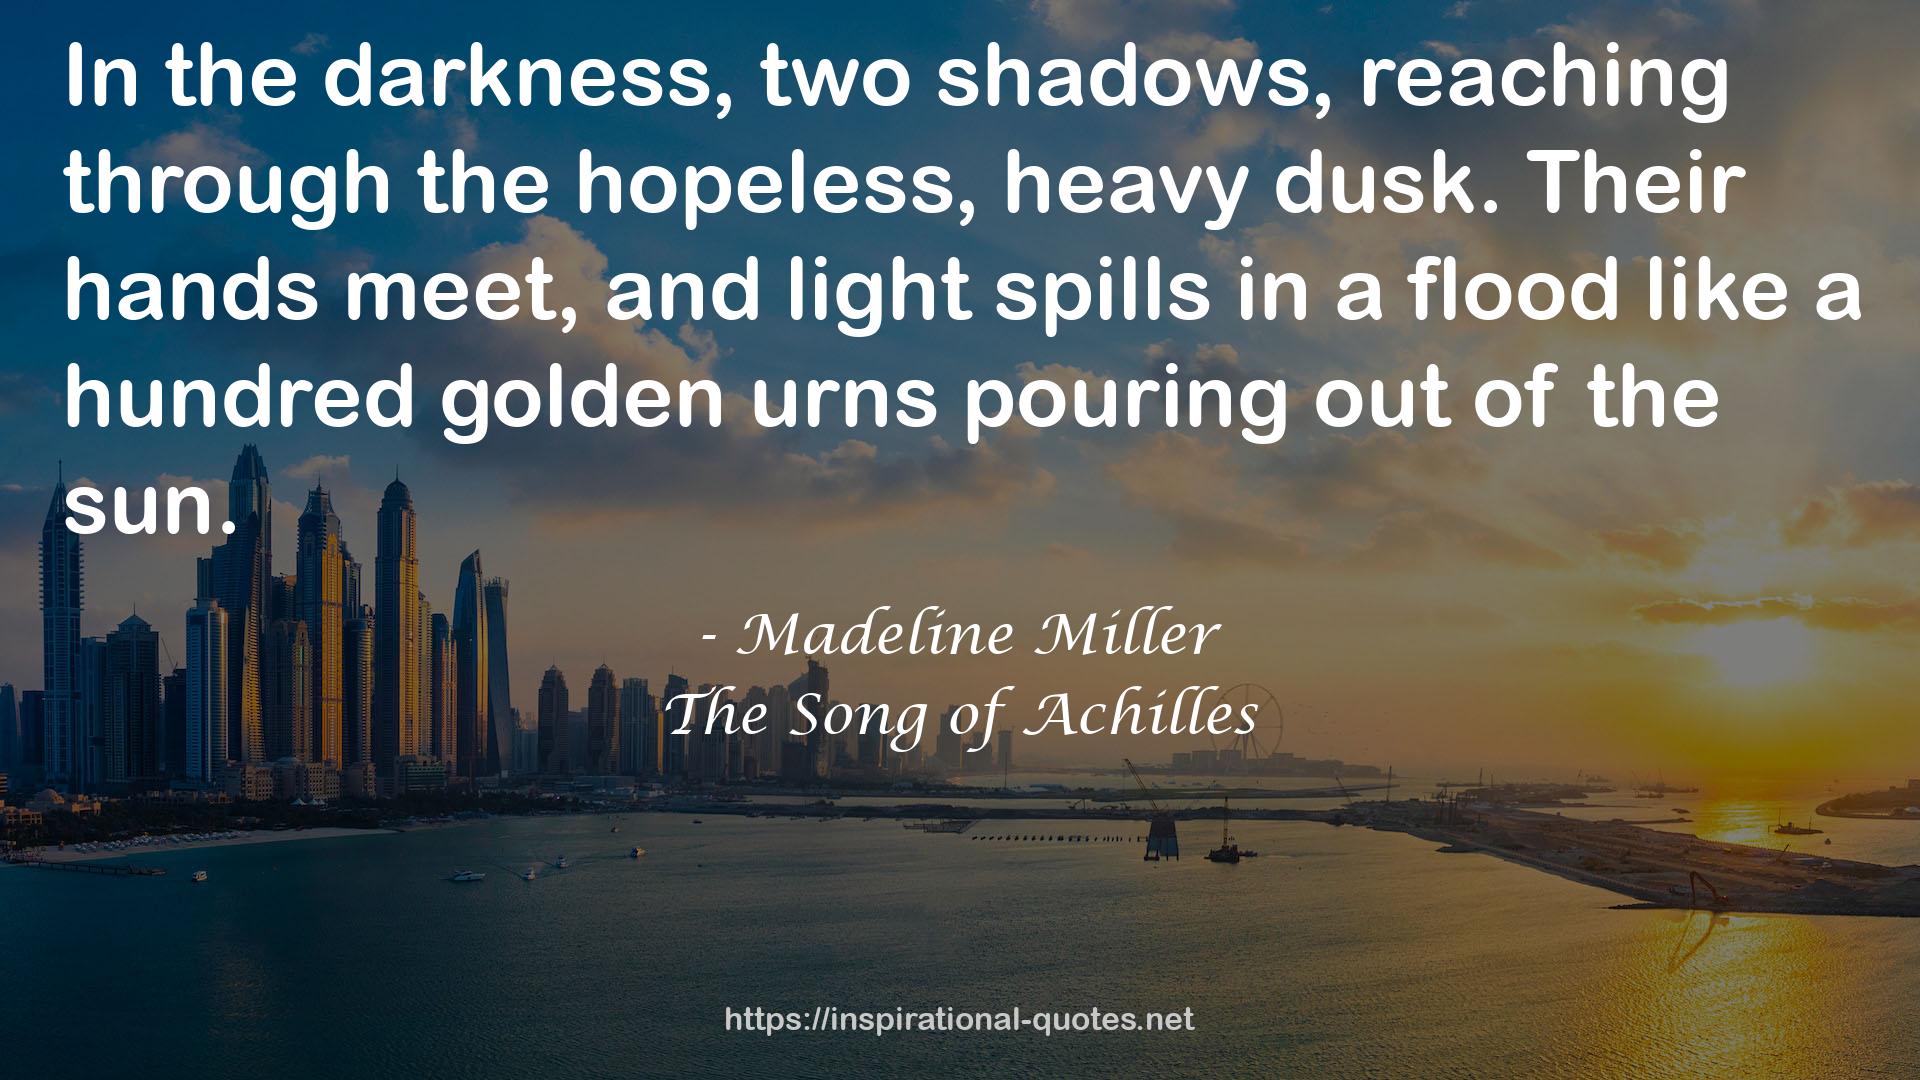 The Song of Achilles QUOTES